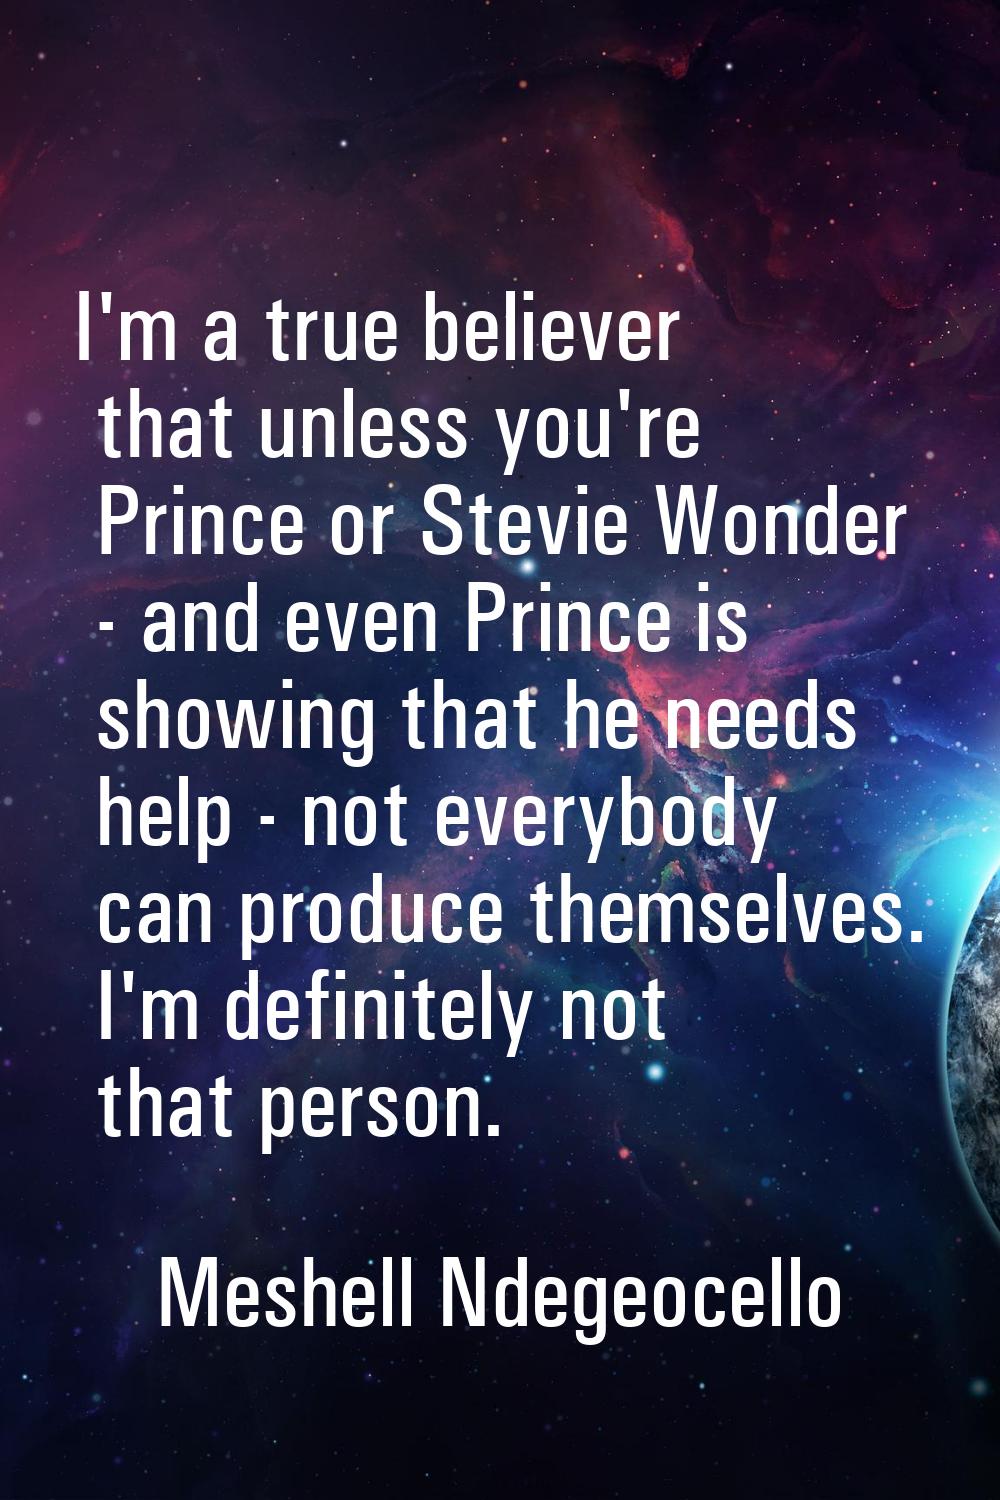 I'm a true believer that unless you're Prince or Stevie Wonder - and even Prince is showing that he